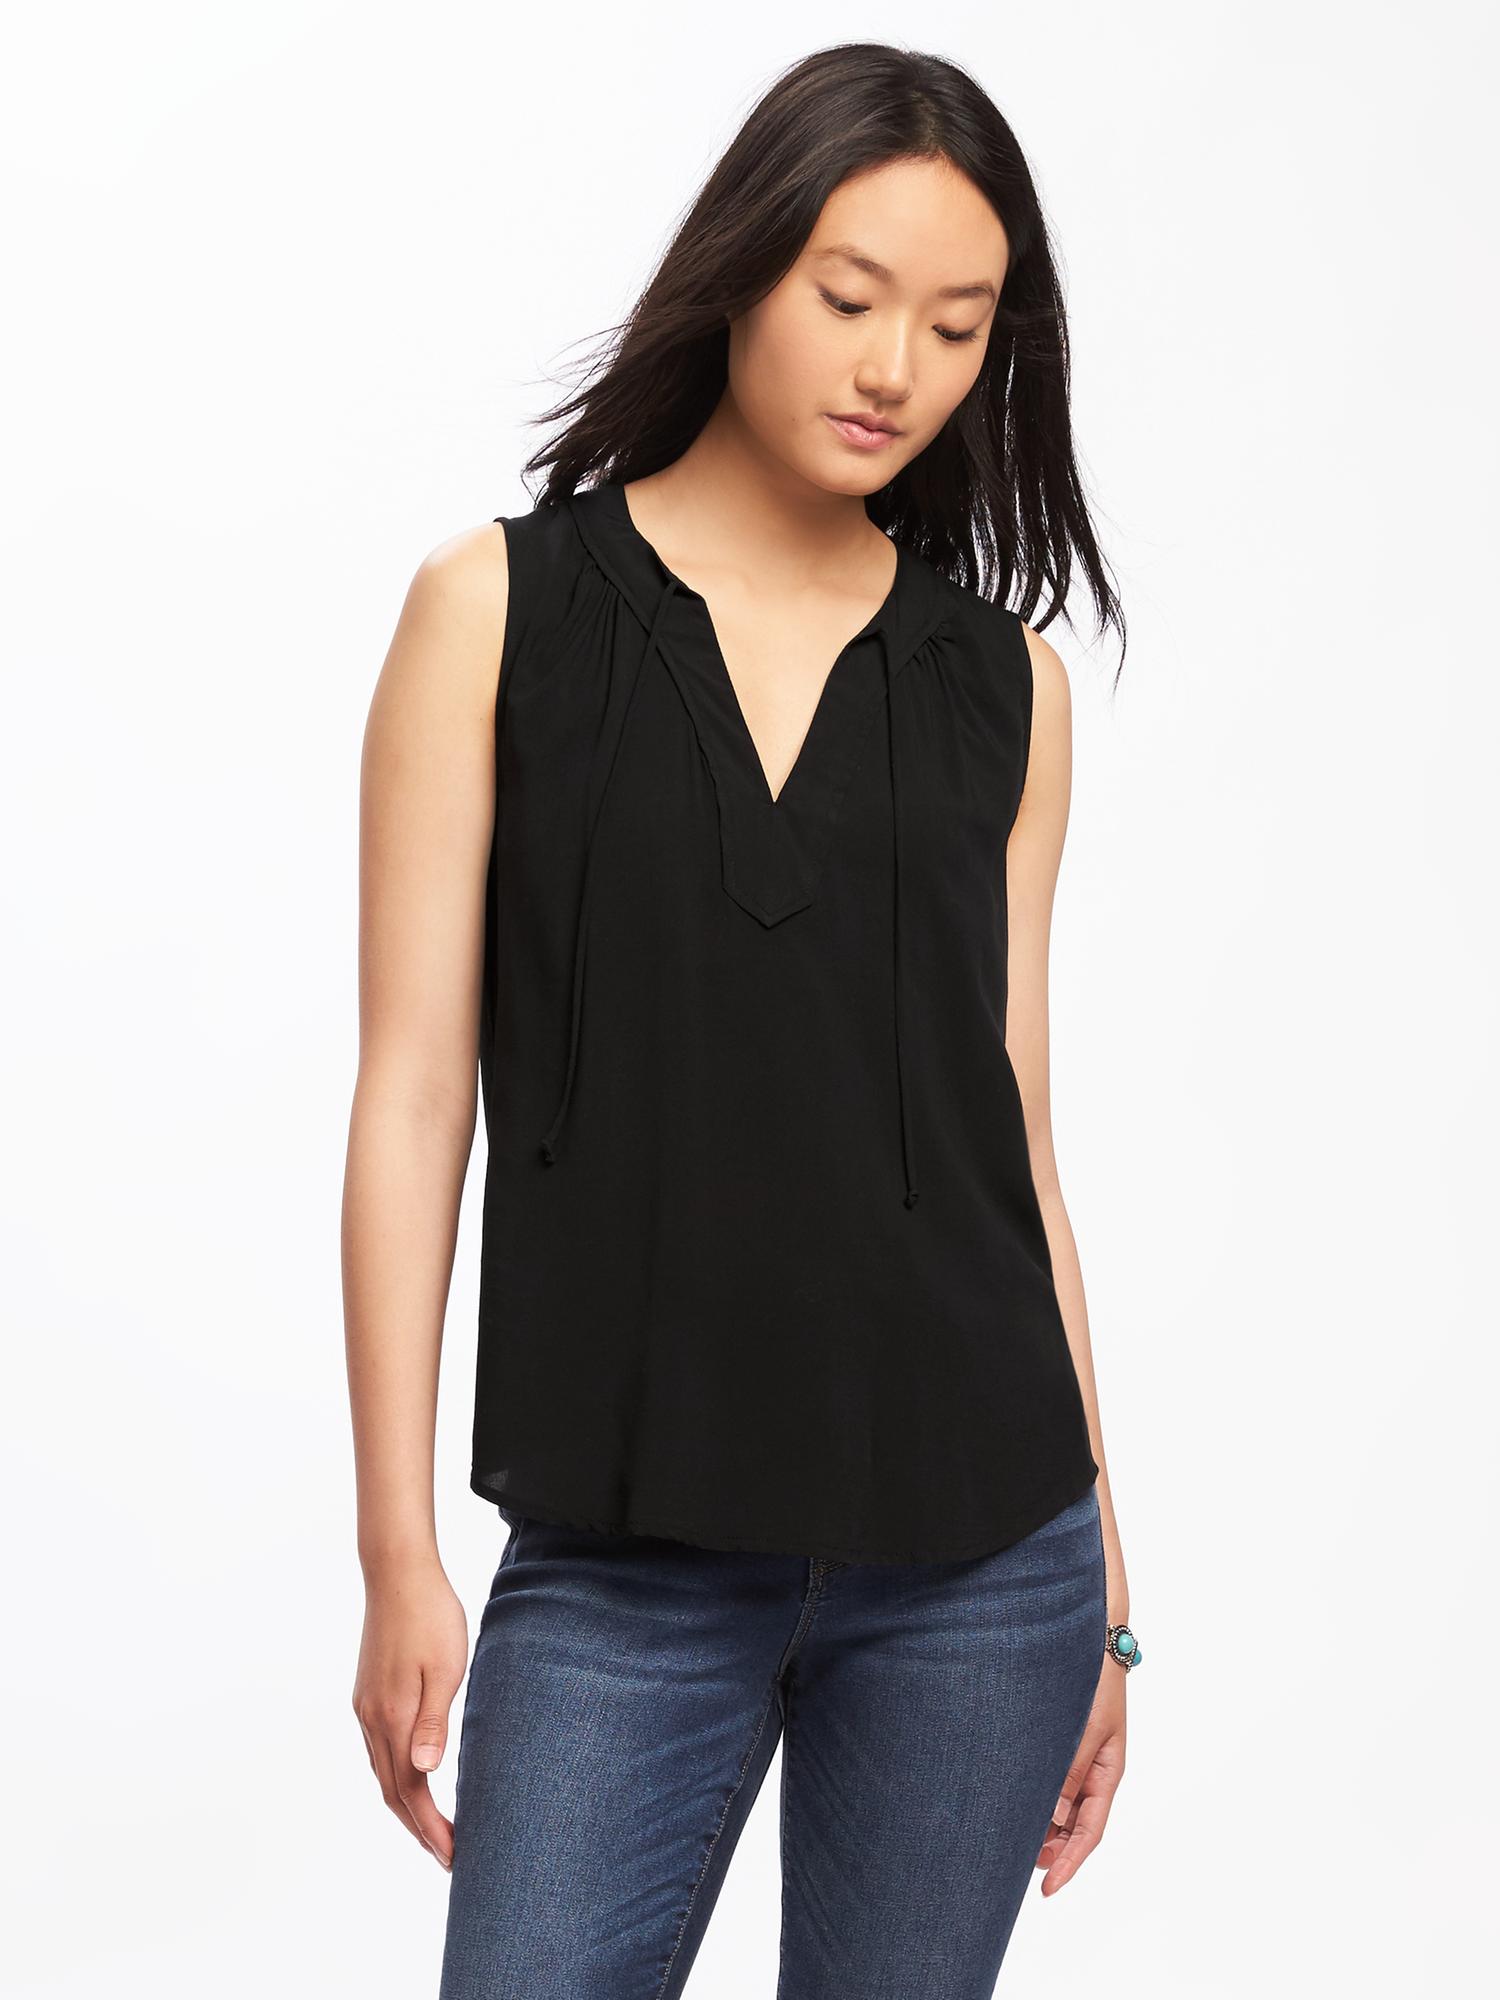 Relaxed Lightweight Sleeveless Top for Women | Old Navy